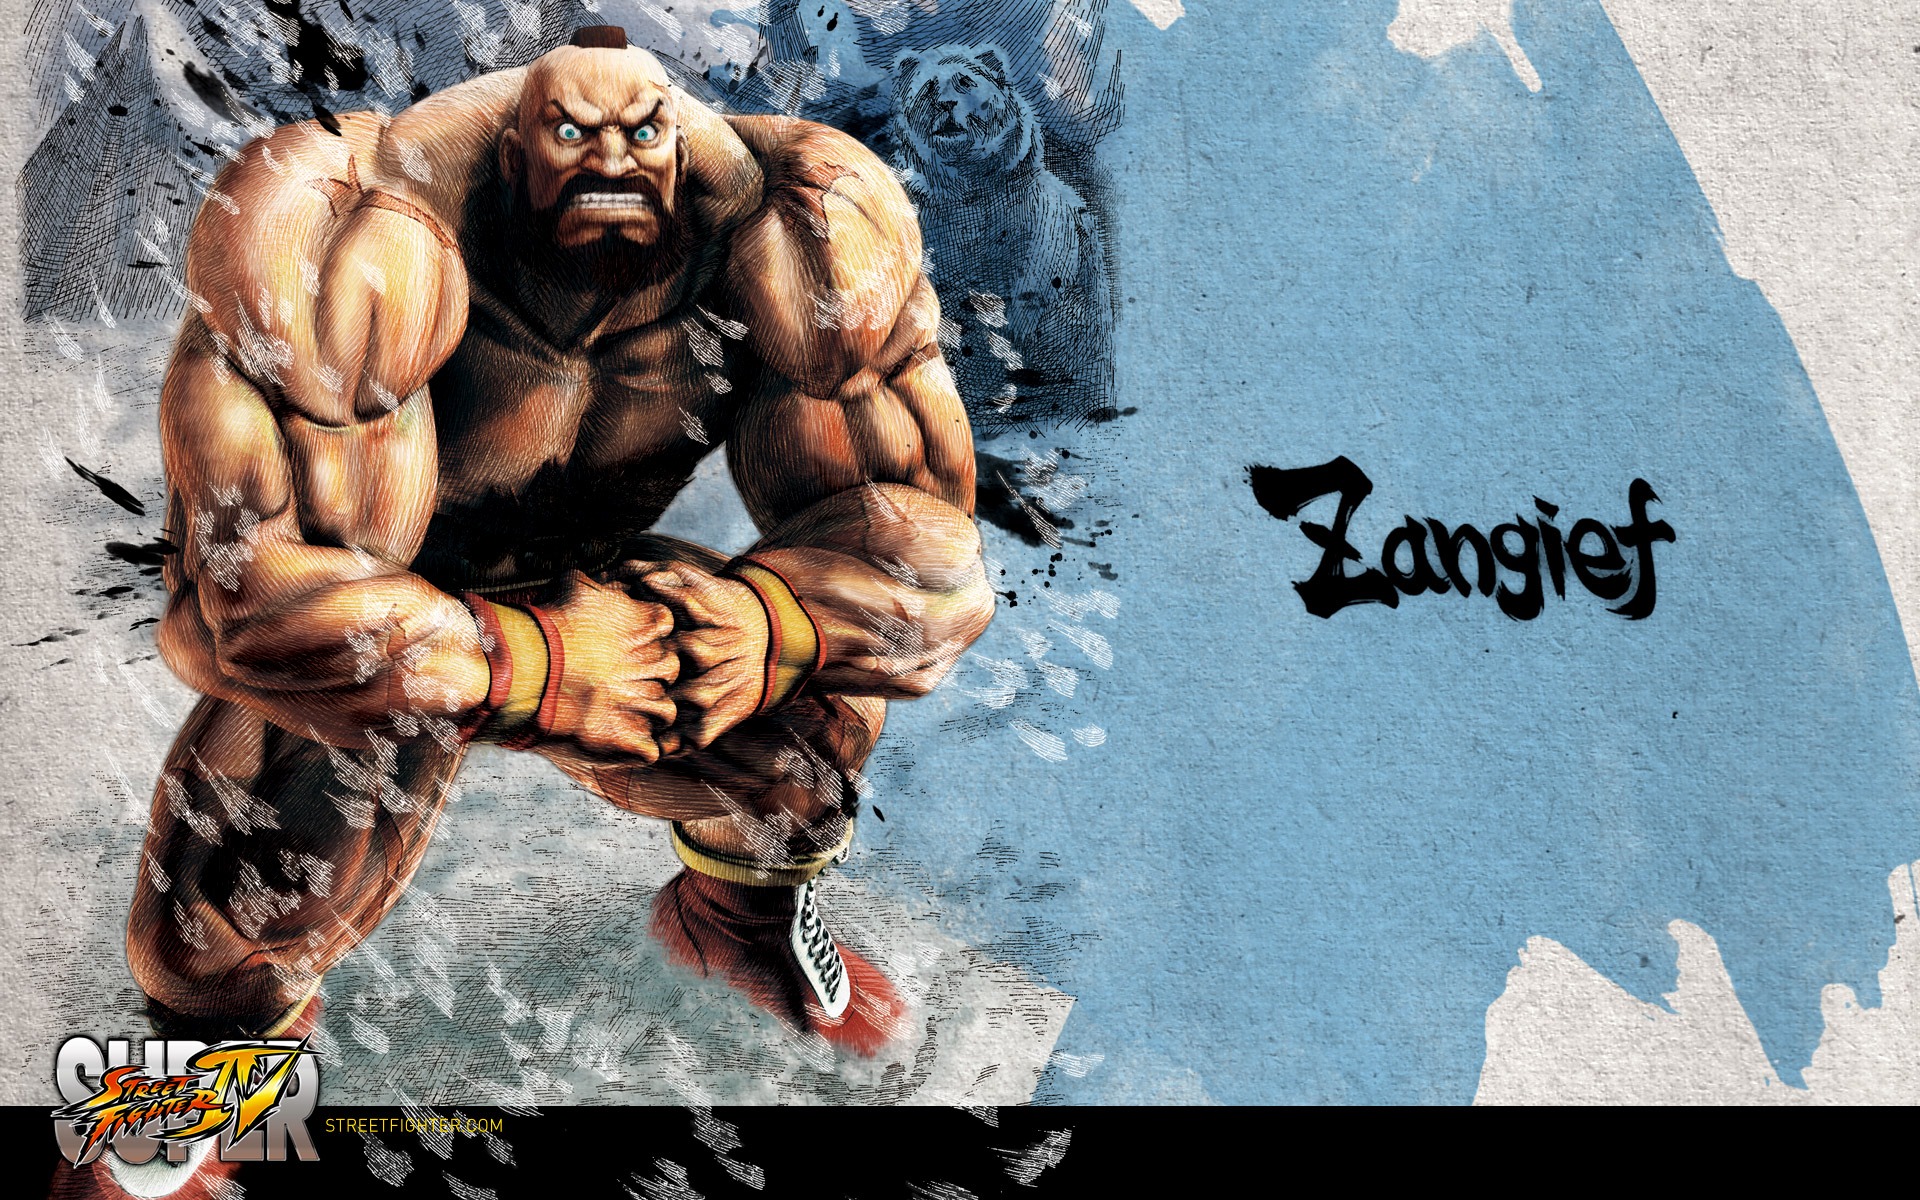 Super Street Fighter 4 Ink Chinese style wallpaper #19 - 1920x1200